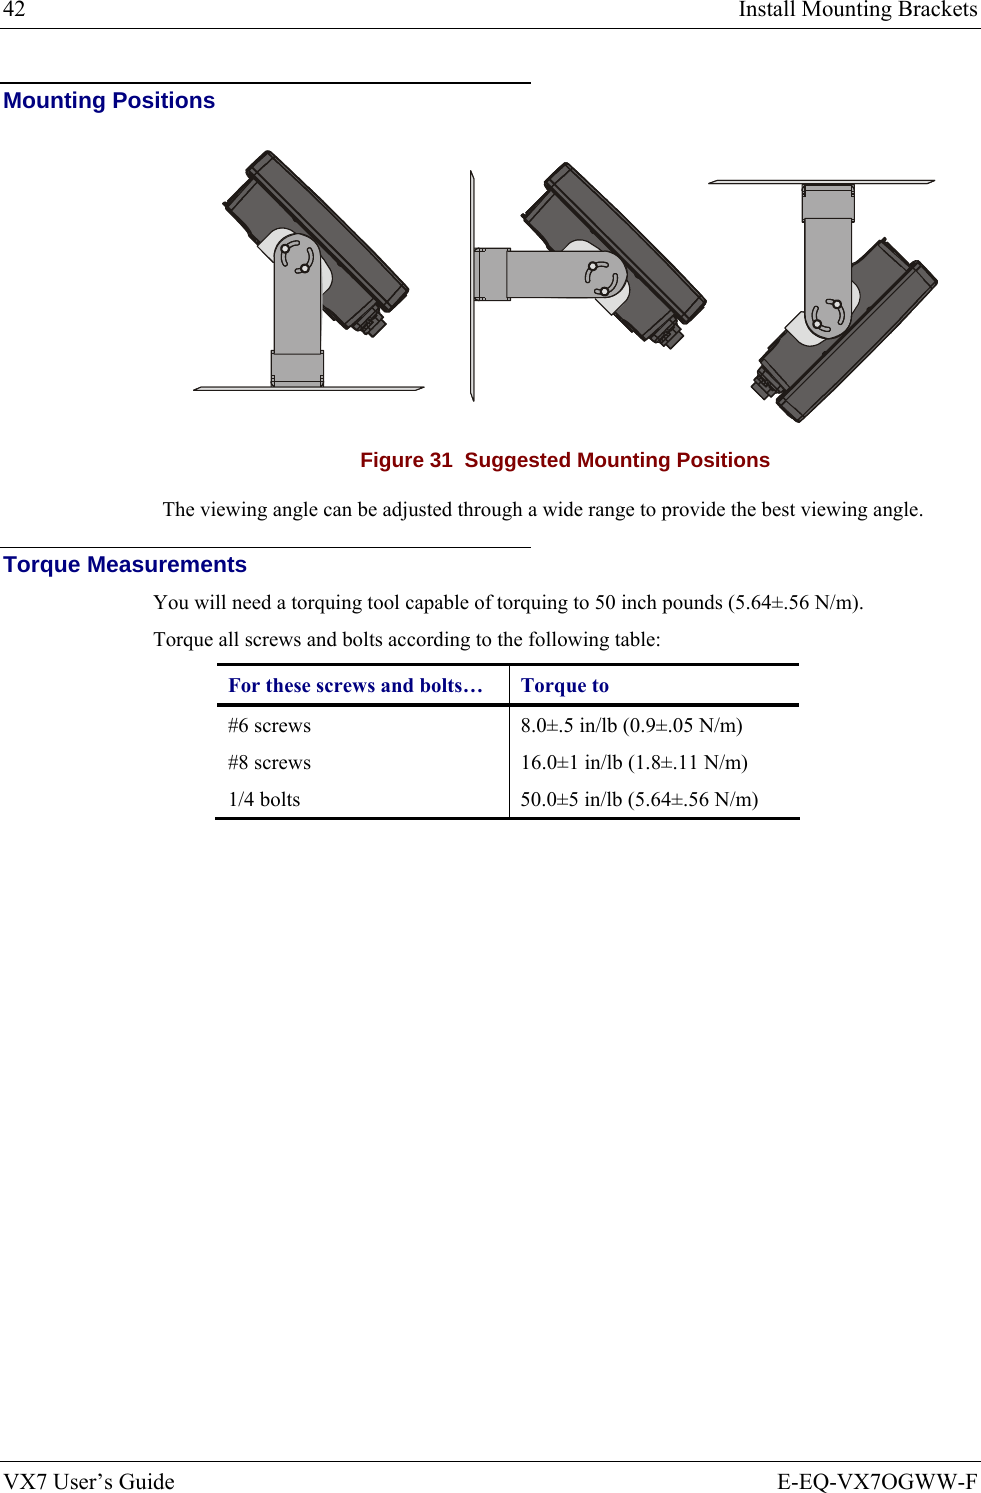 42  Install Mounting Brackets VX7 User’s Guide  E-EQ-VX7OGWW-F Mounting Positions  Figure 31  Suggested Mounting Positions The viewing angle can be adjusted through a wide range to provide the best viewing angle. Torque Measurements You will need a torquing tool capable of torquing to 50 inch pounds (5.64±.56 N/m). Torque all screws and bolts according to the following table: For these screws and bolts…  Torque to #6 screws  8.0±.5 in/lb (0.9±.05 N/m) #8 screws  16.0±1 in/lb (1.8±.11 N/m) 1/4 bolts  50.0±5 in/lb (5.64±.56 N/m)   